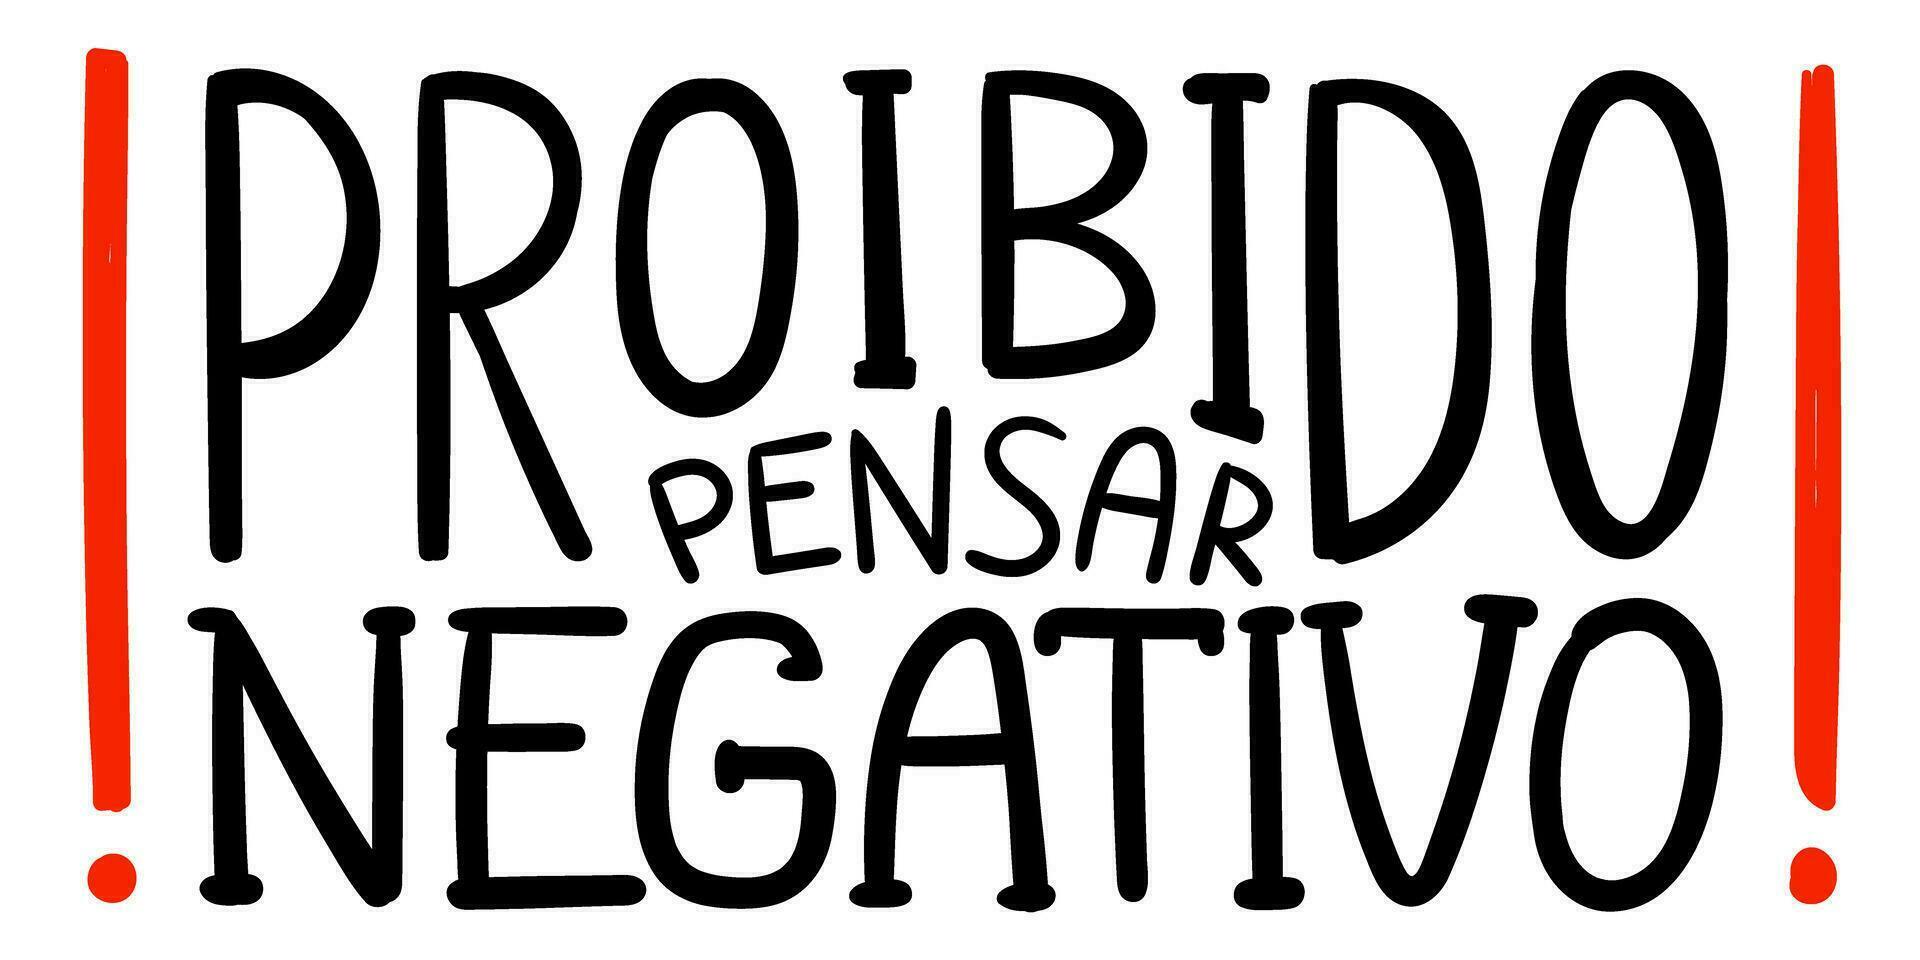 Positive lettering in Brazilian Portuguese. Translation - Negative thinking is forbidden. vector